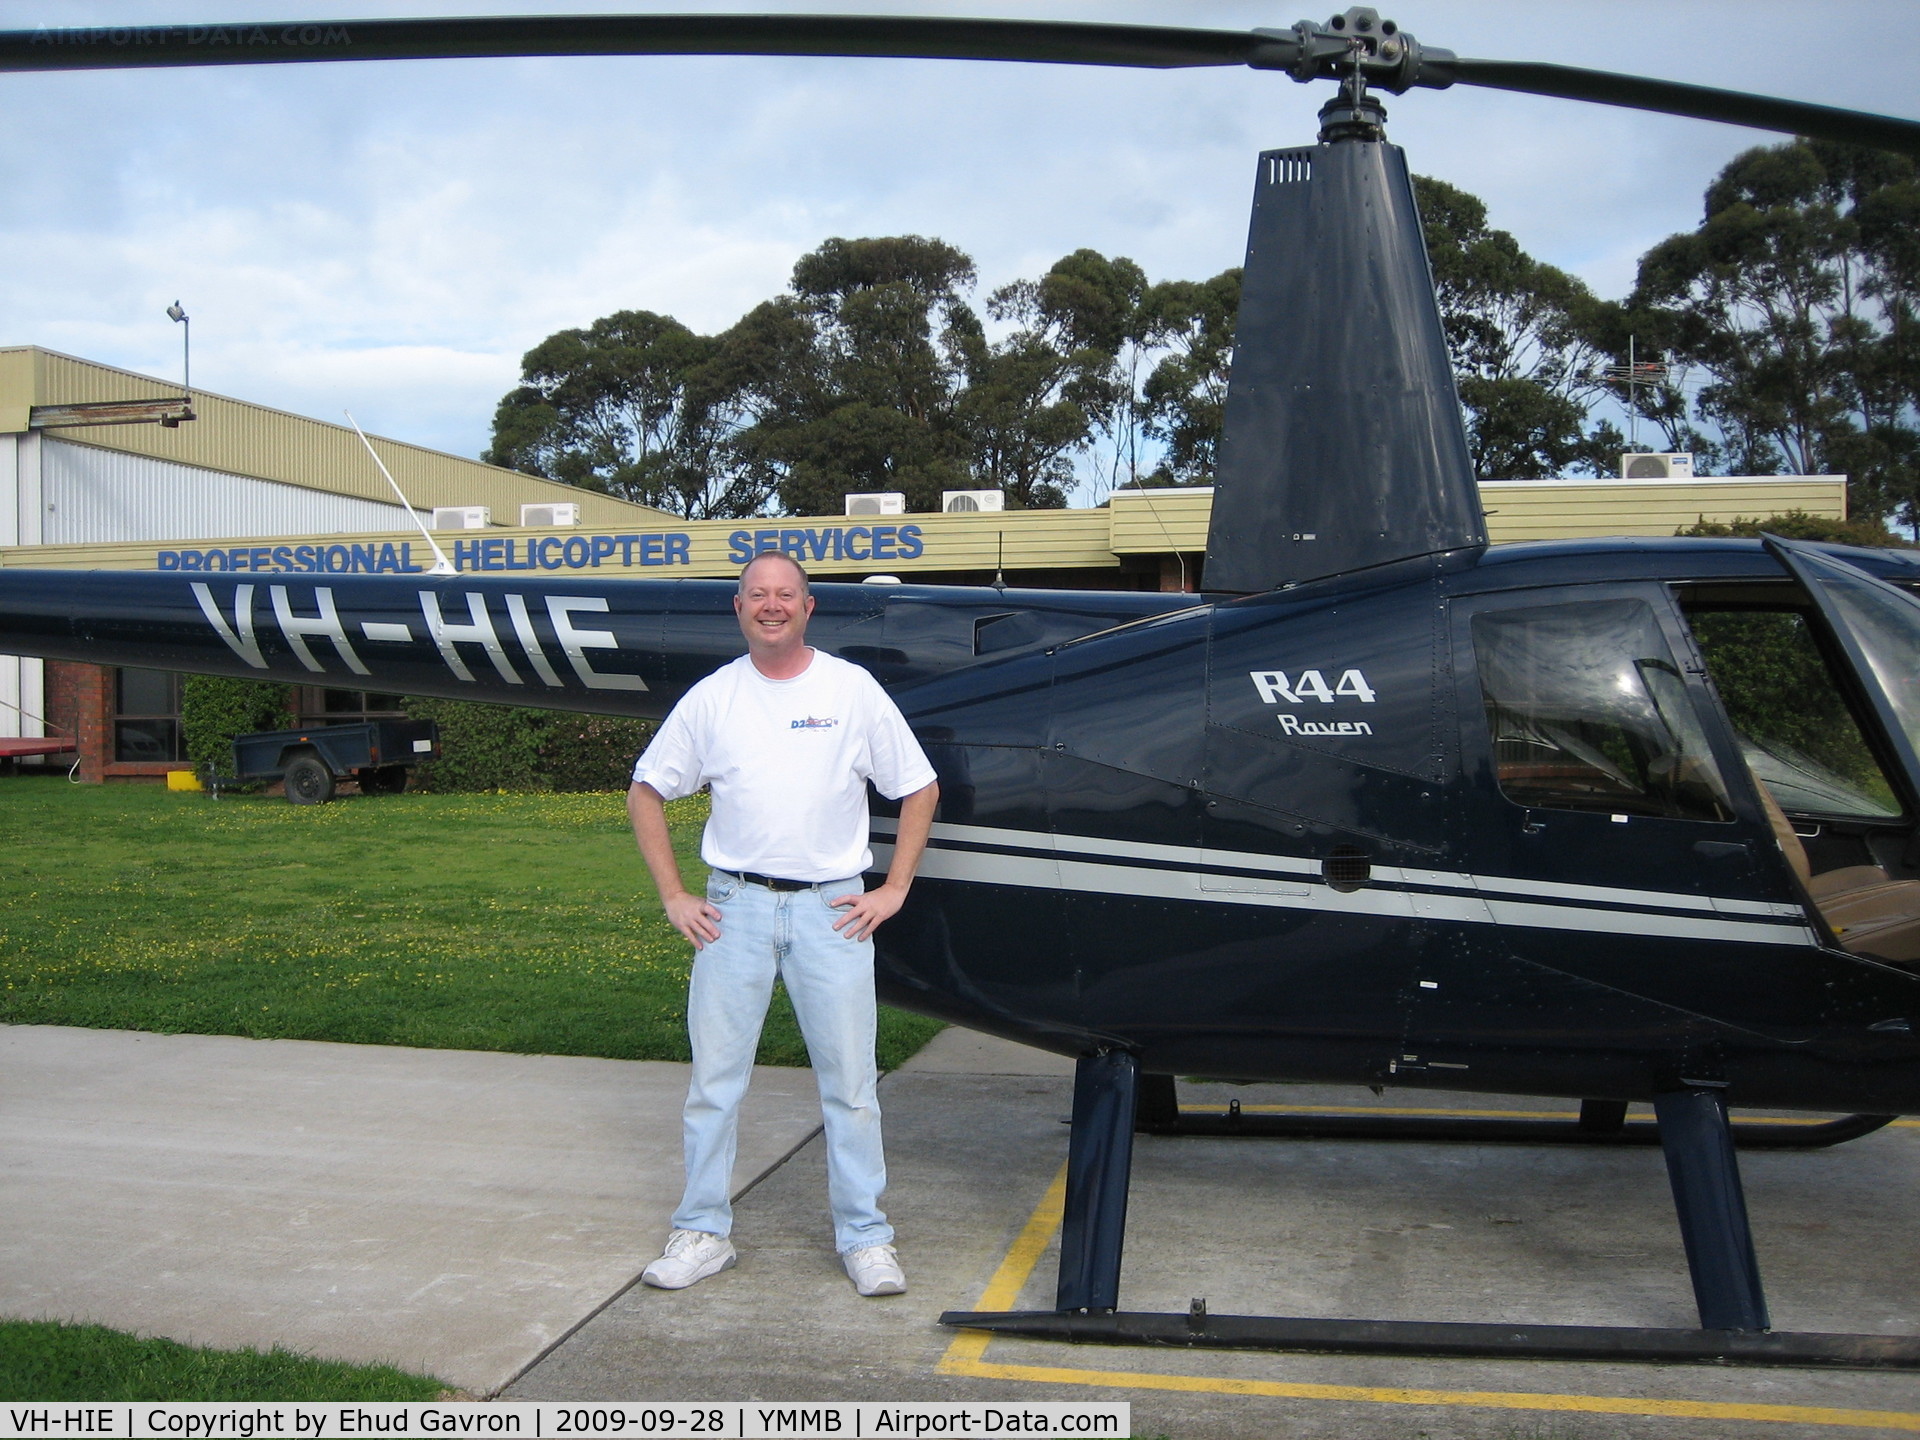 VH-HIE, 2001 Robinson R44 C/N 1112, Did the preflight... but lack of paperwork meant we flew the 206B2 instead... :)  (R44 at Moorabbin)